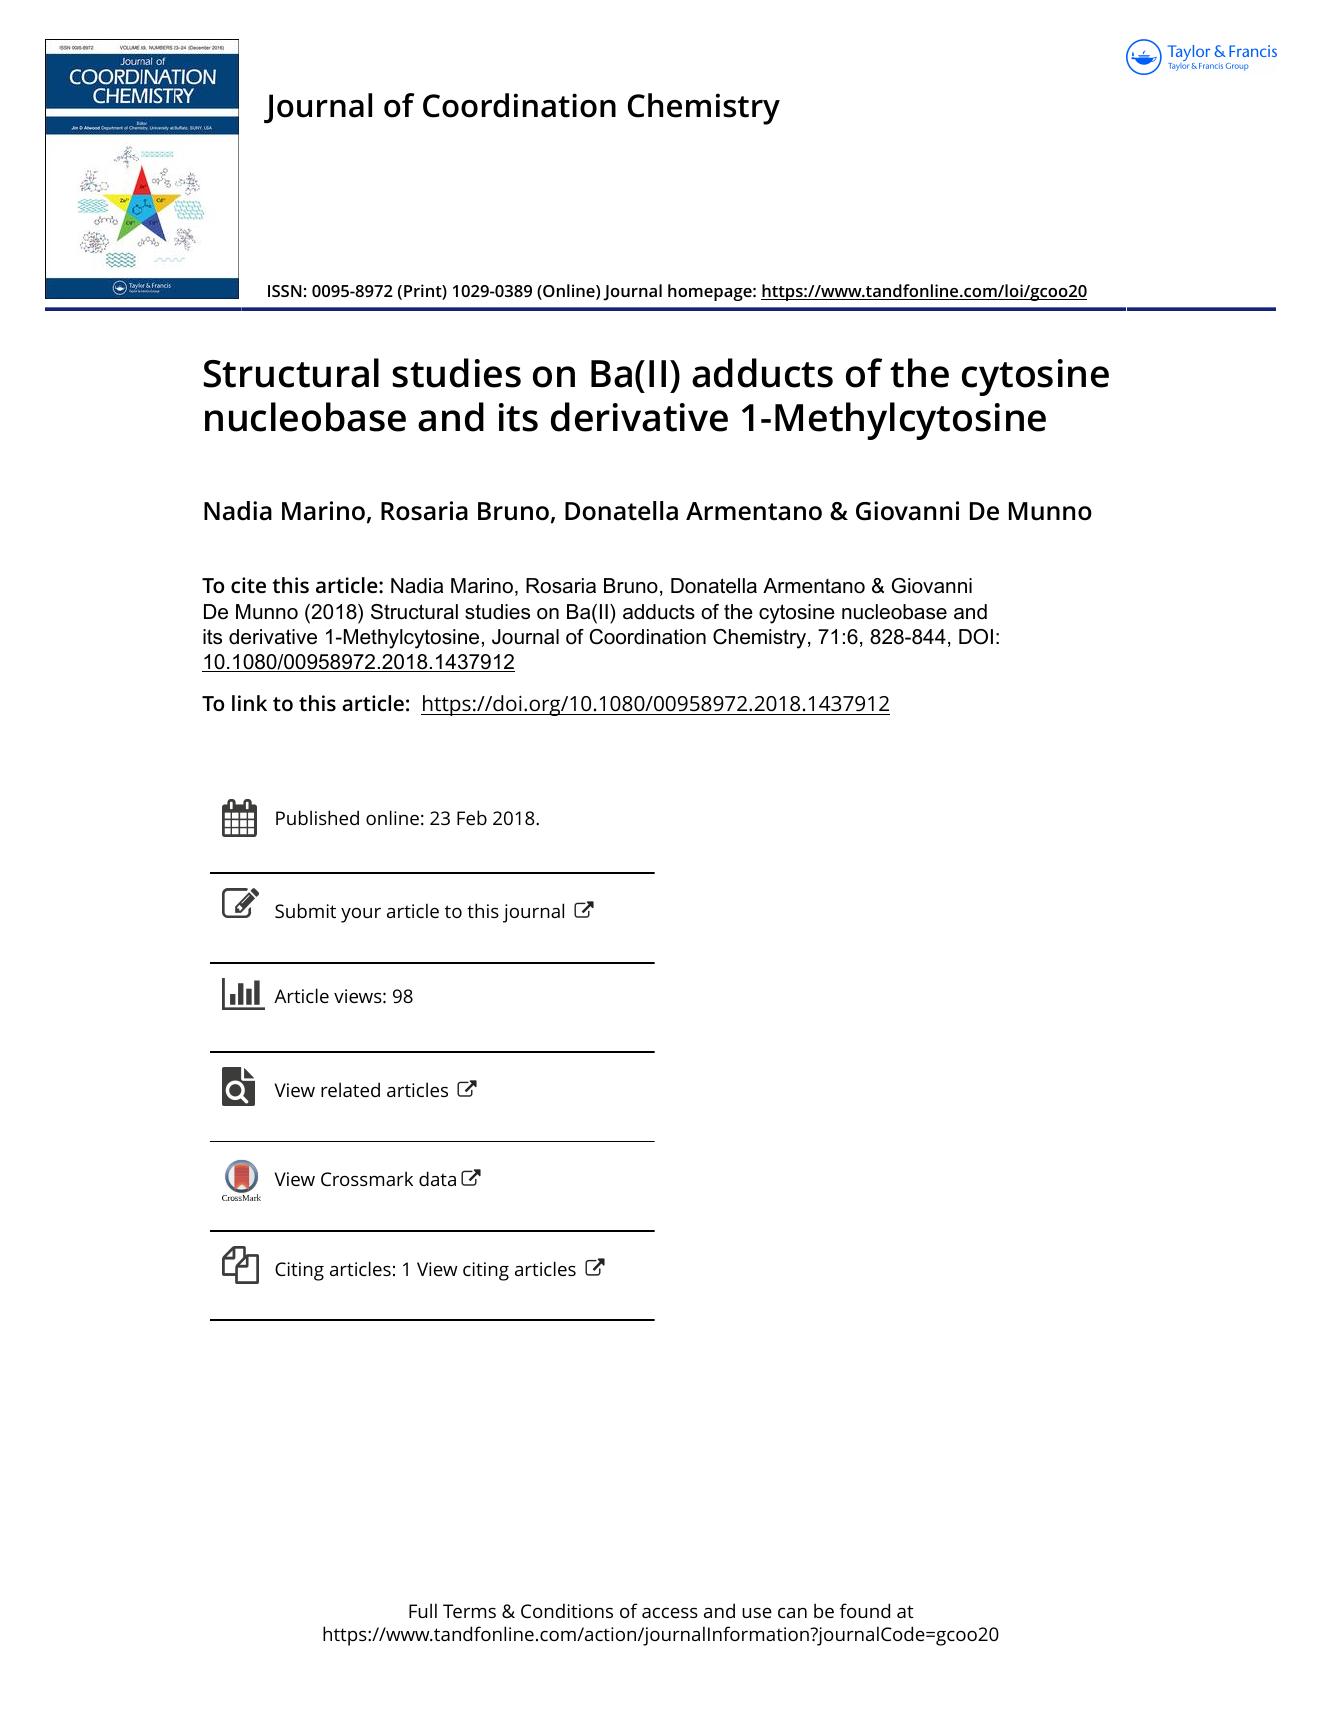 Structural studies on Ba(II) adducts of the cytosine nucleobase and its derivative 1-Methylcytosine by Nadia Marino & Rosaria Bruno & Donatella Armentano & Giovanni De Munno